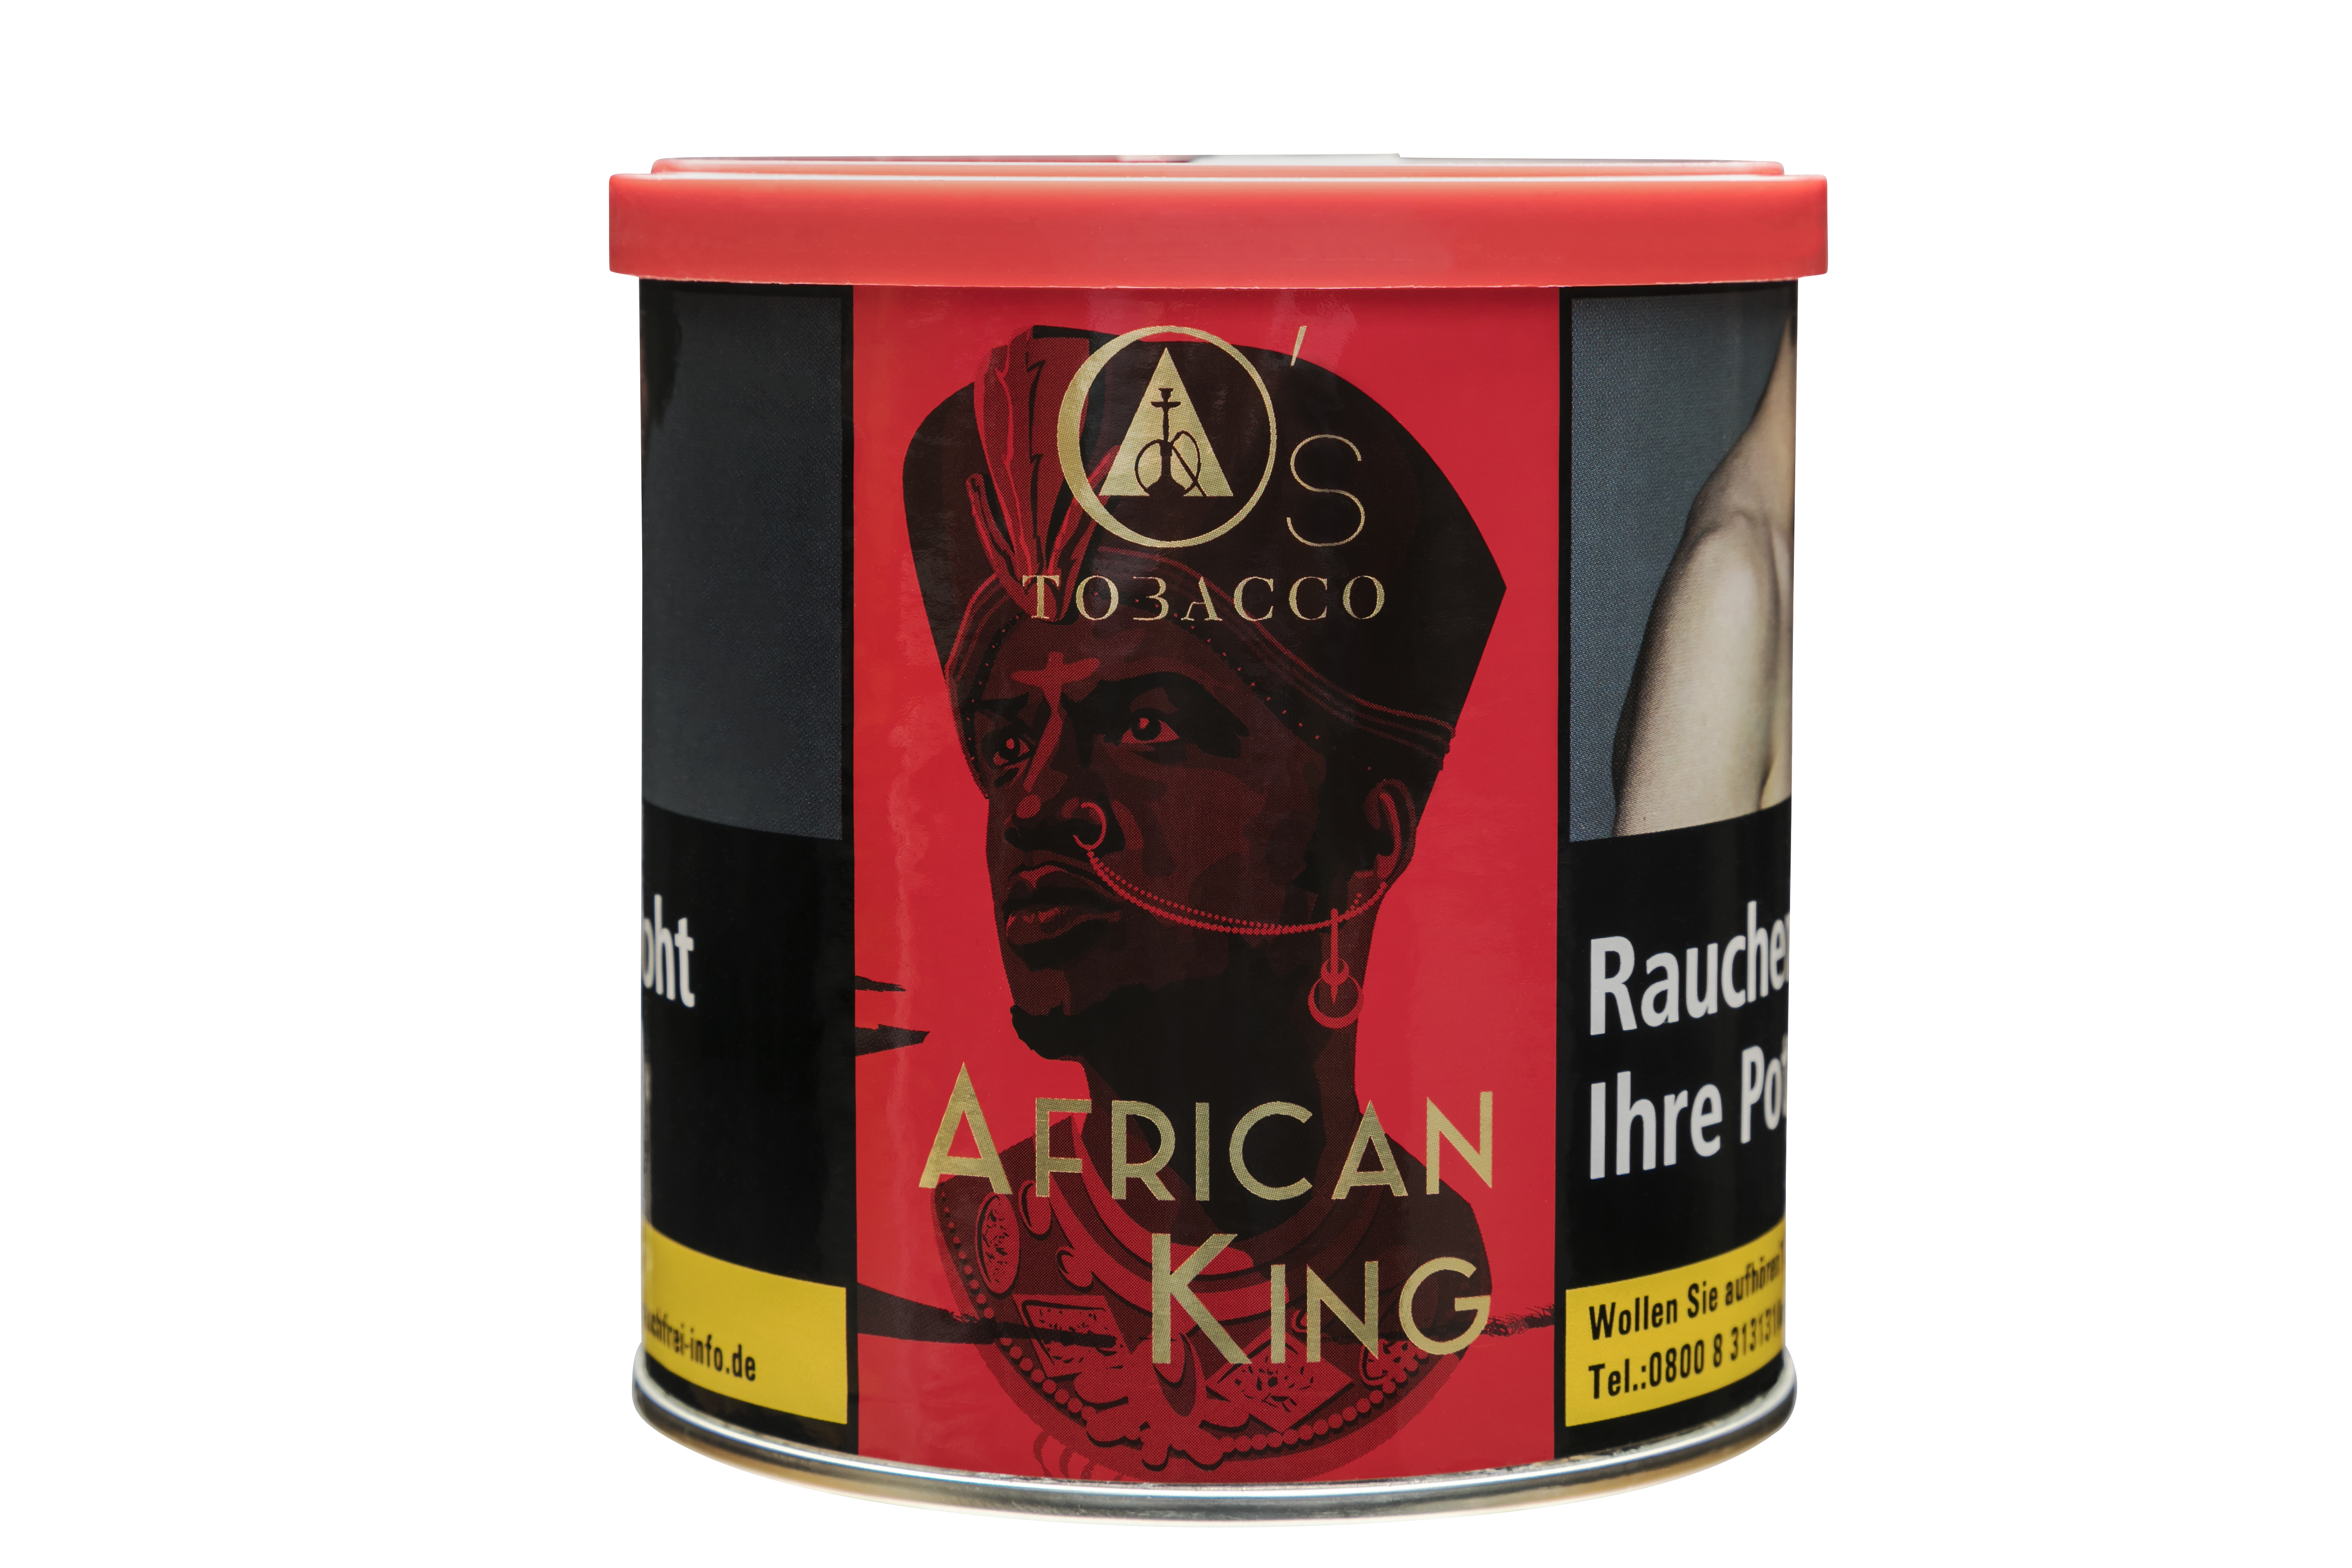 OS Tobacco African King 200g